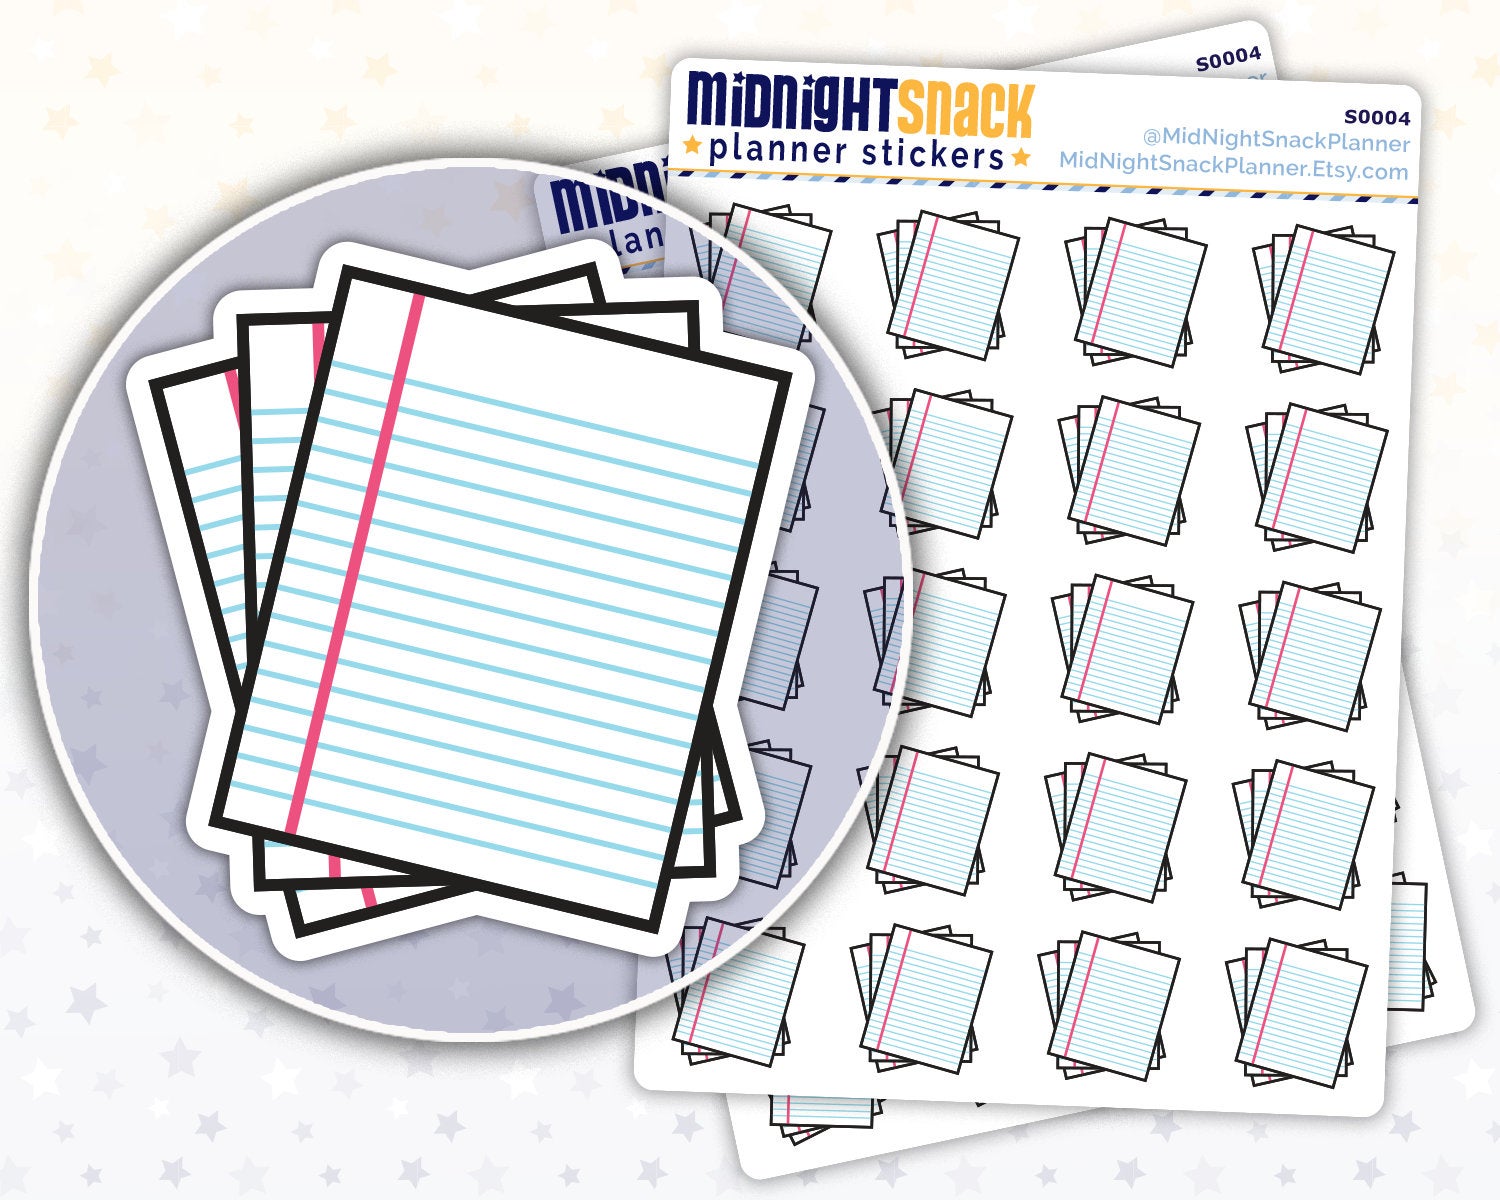 Stack of Paper Writing Homework School Planner Stickers from Midnight Snack Planner